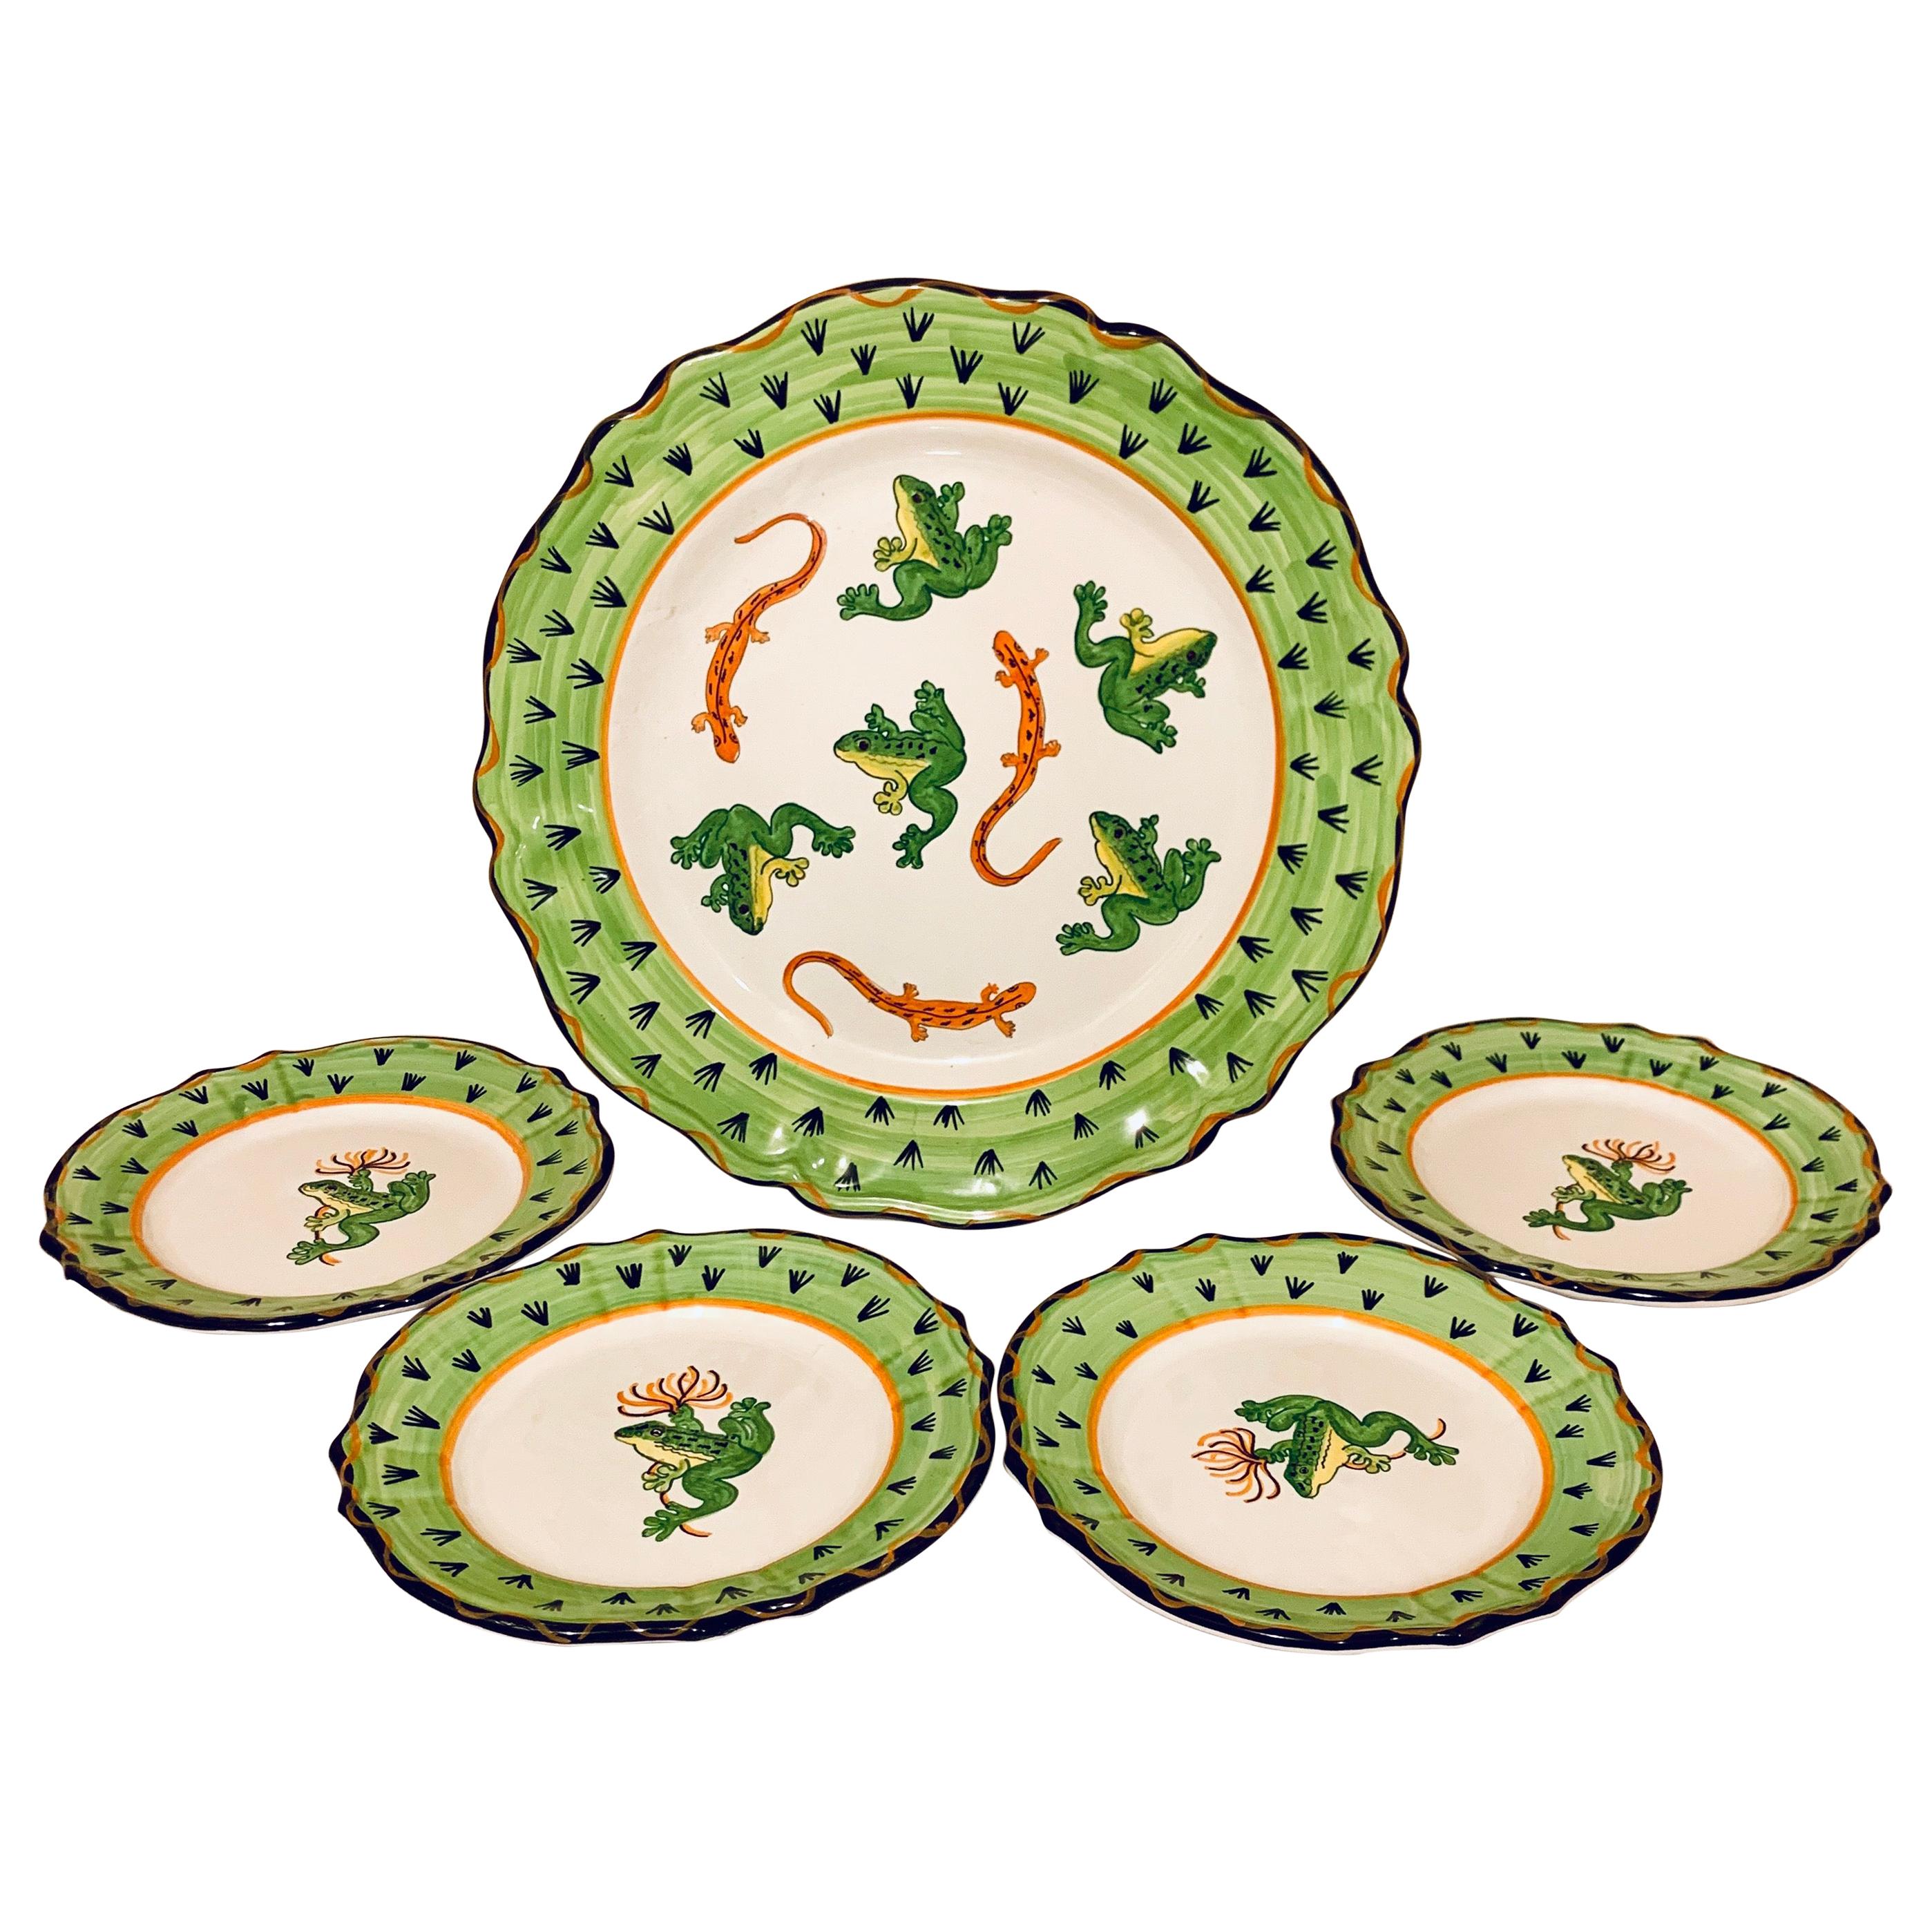 Five-Piece Deruta Made in Italy Majolica Platter and Plate Set Charger Serveware